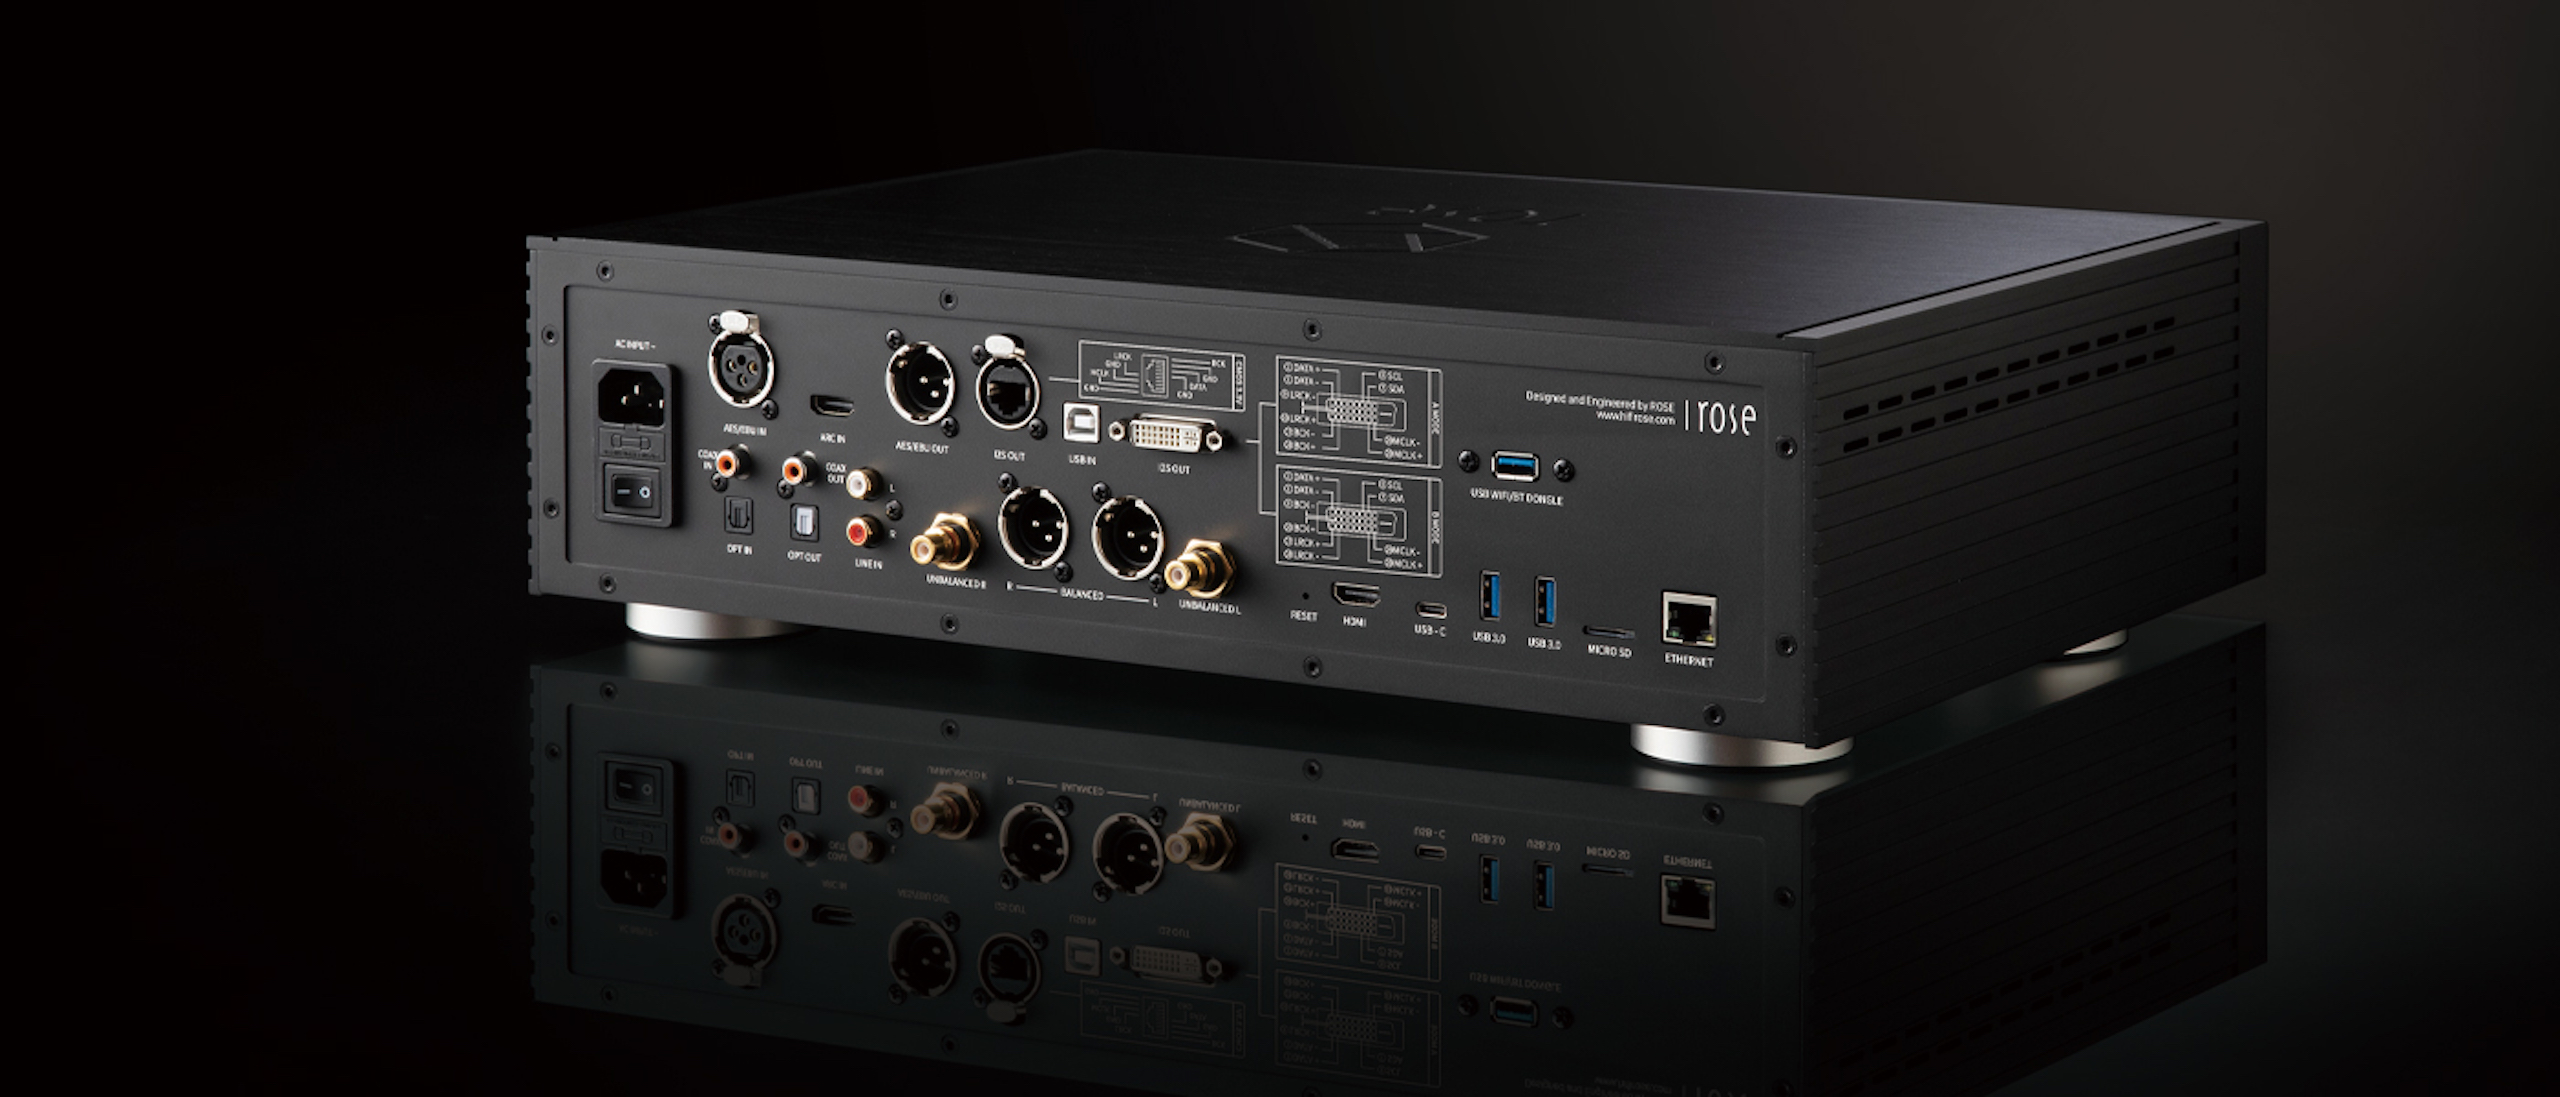 Review: HiFi Rose RS150b Reference Network Streamer - Twittering Machines